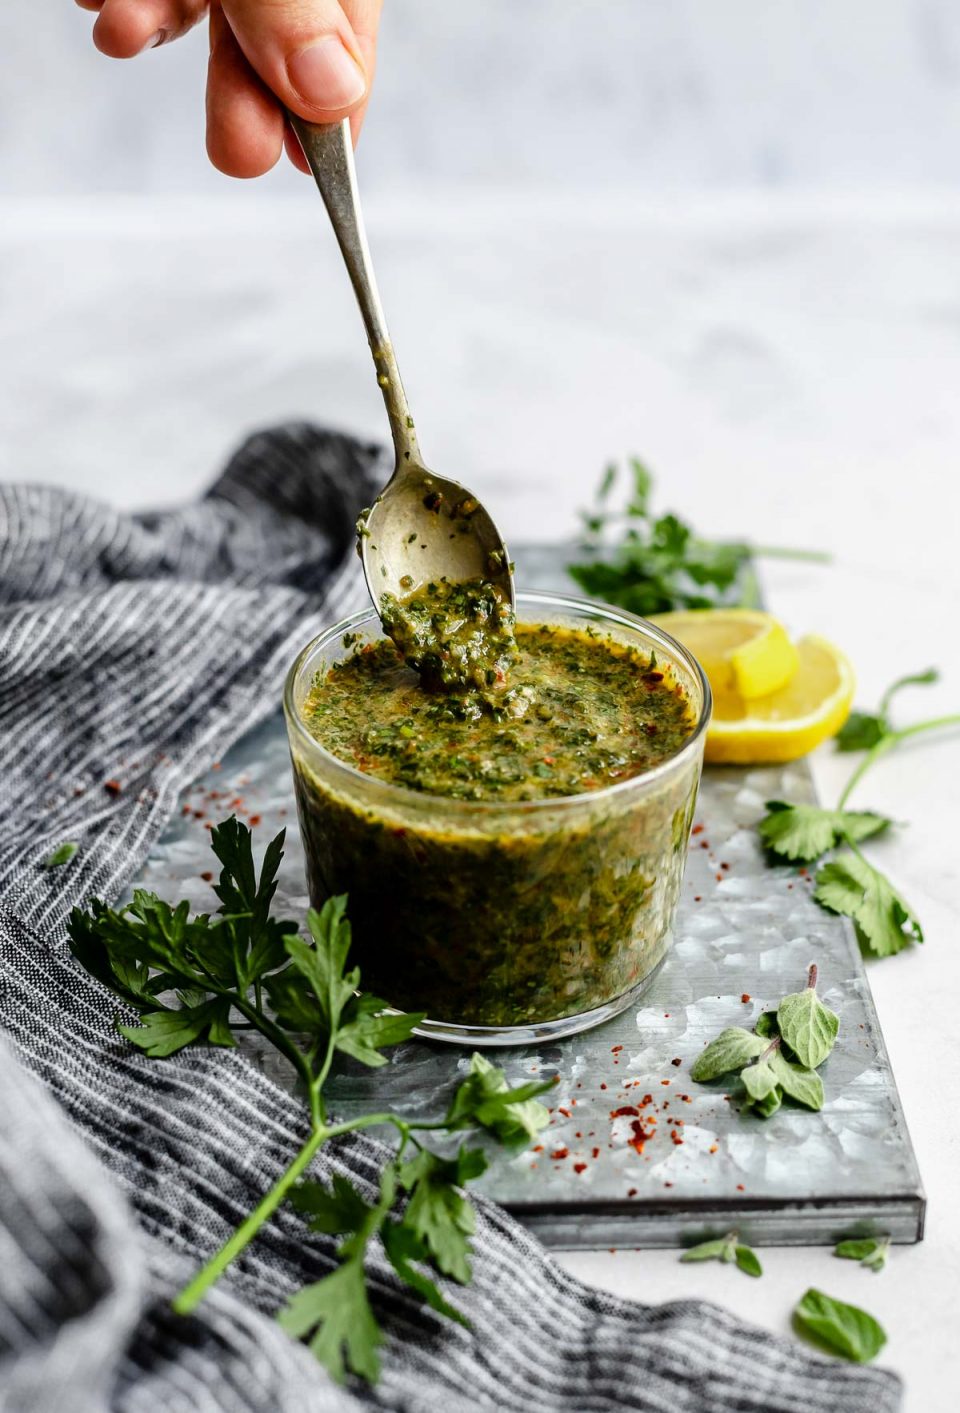 An angled shot of a jar of Chimichurri sauce that sits on a dark gray surface. A spoon has been dipped into the sauce & is being lifted out of the jar with sauce dripping from it. The jar is surrounded by fresh herbs & a slice of lemon.